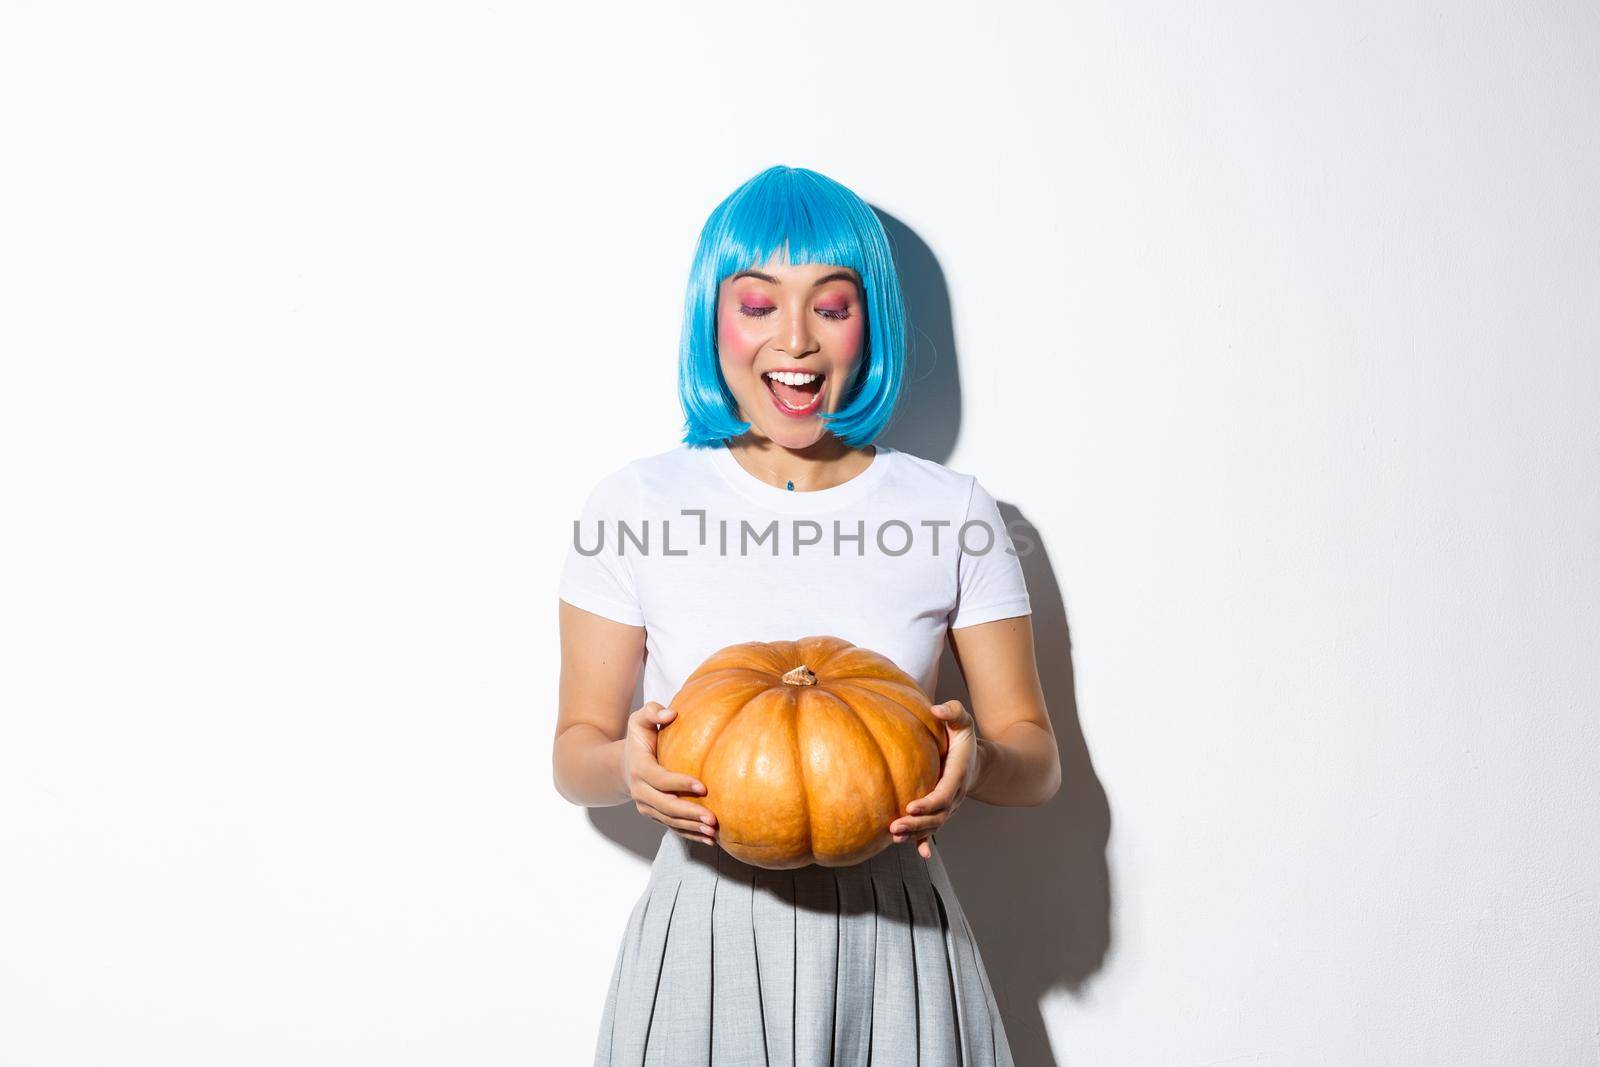 Beautiful smiling asian woman celebrating halloween in blue wig, looking at pumpkin with happy expression, standing over white background.